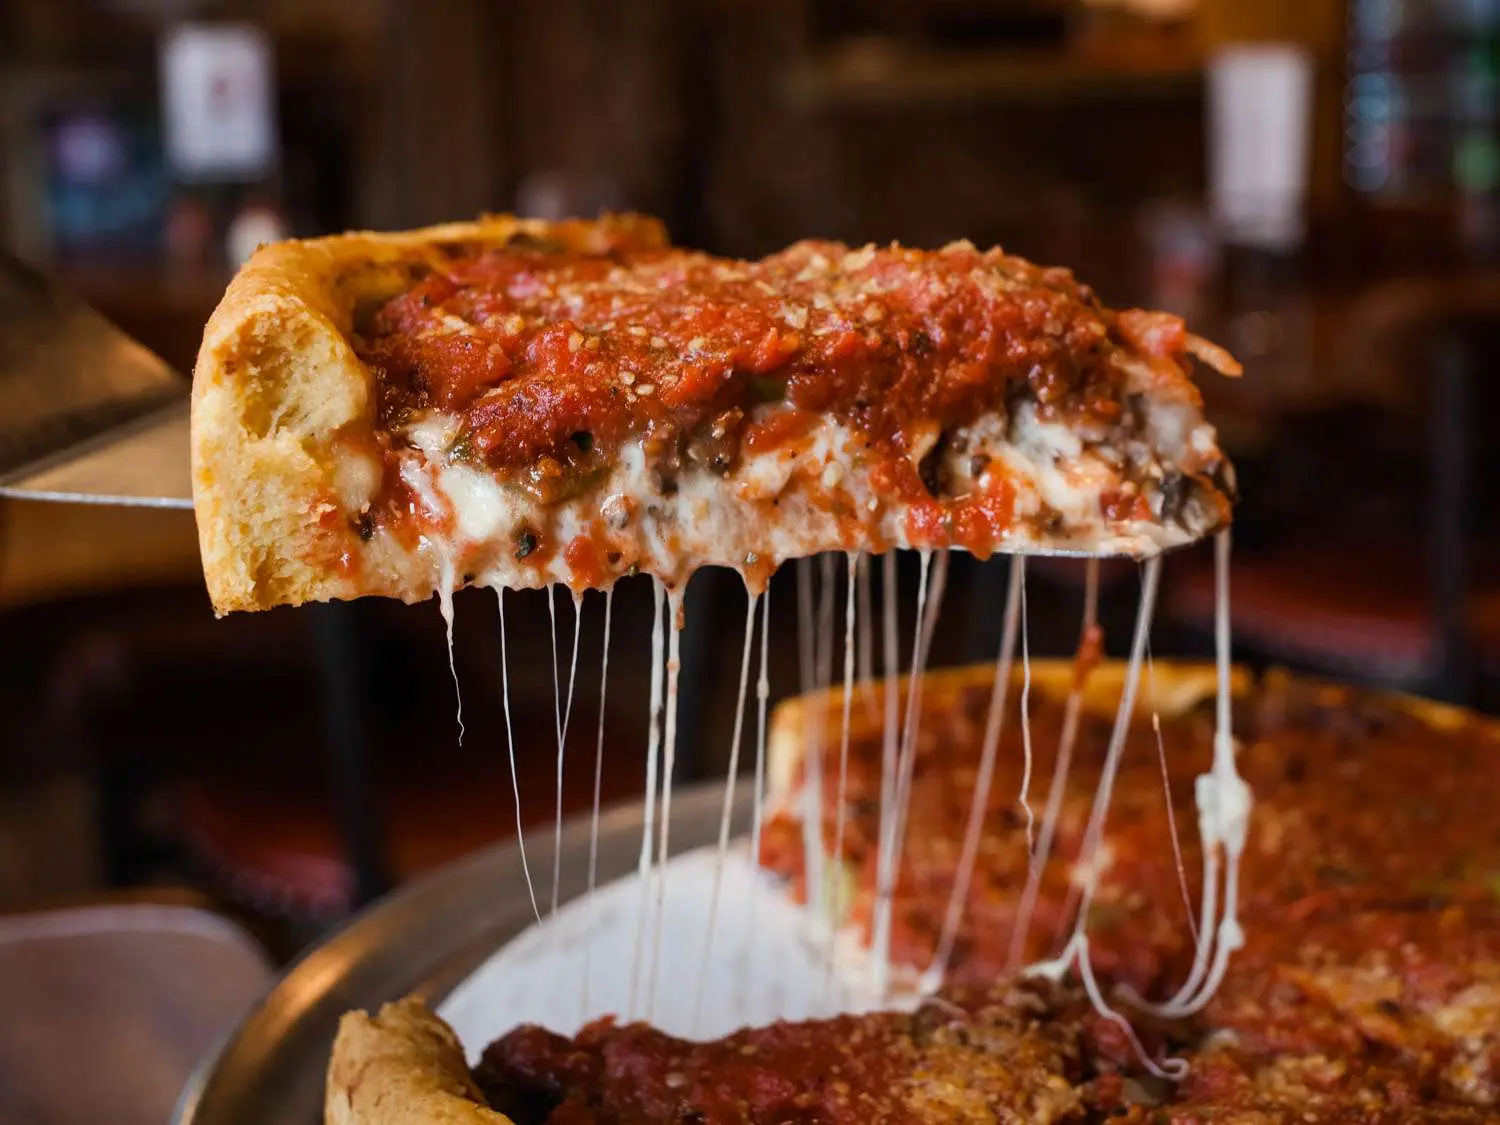 best chicago style pizza - What is the most popular pizza topping in Chicago